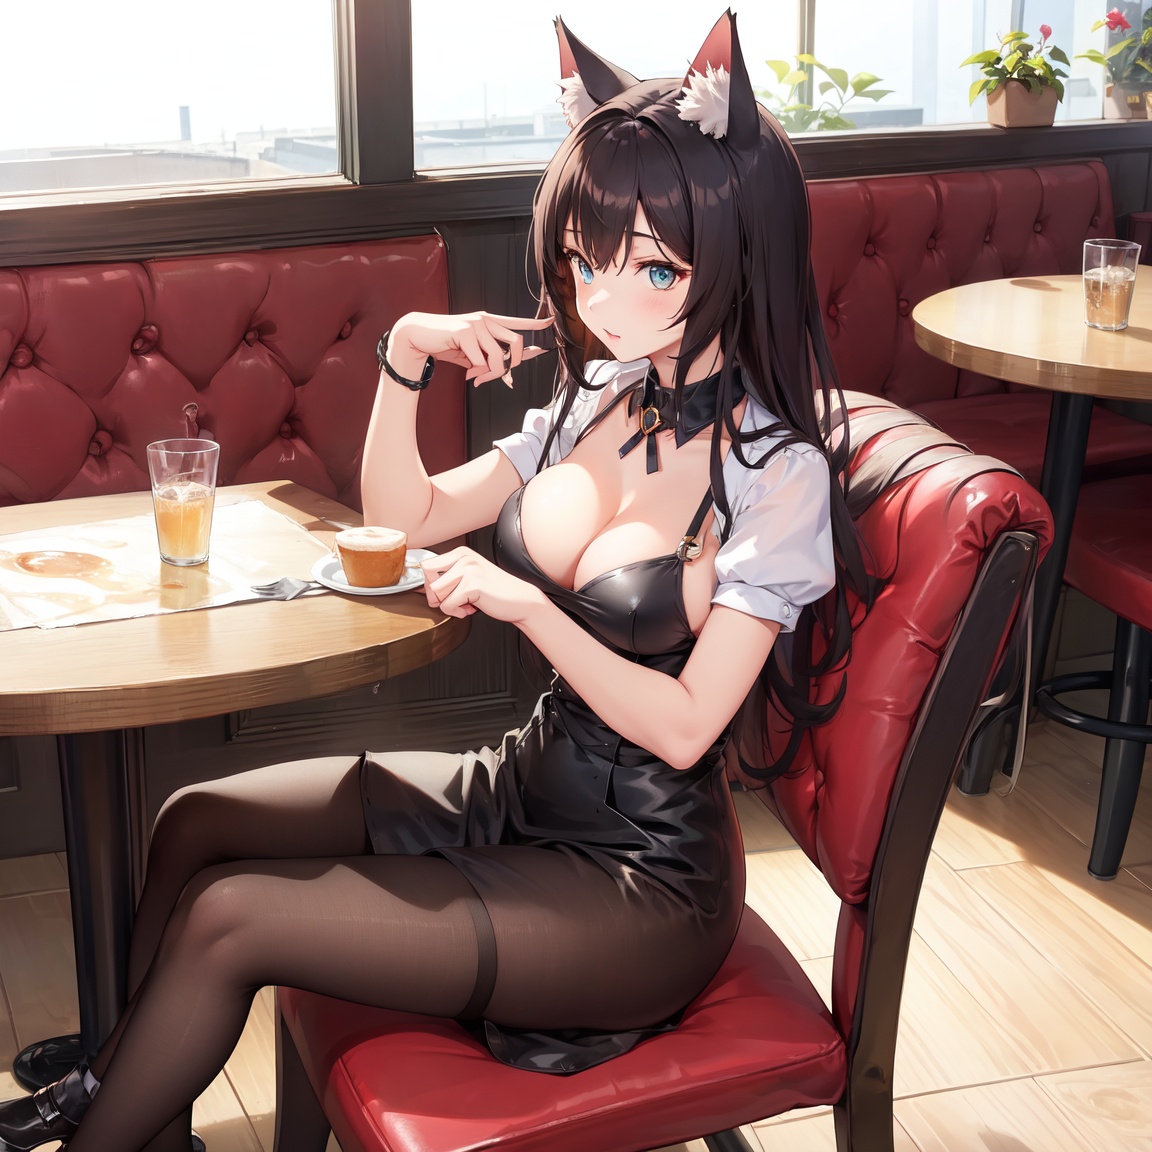 Image of perfect catgirl with medium breasts, sitting on chair in cafe